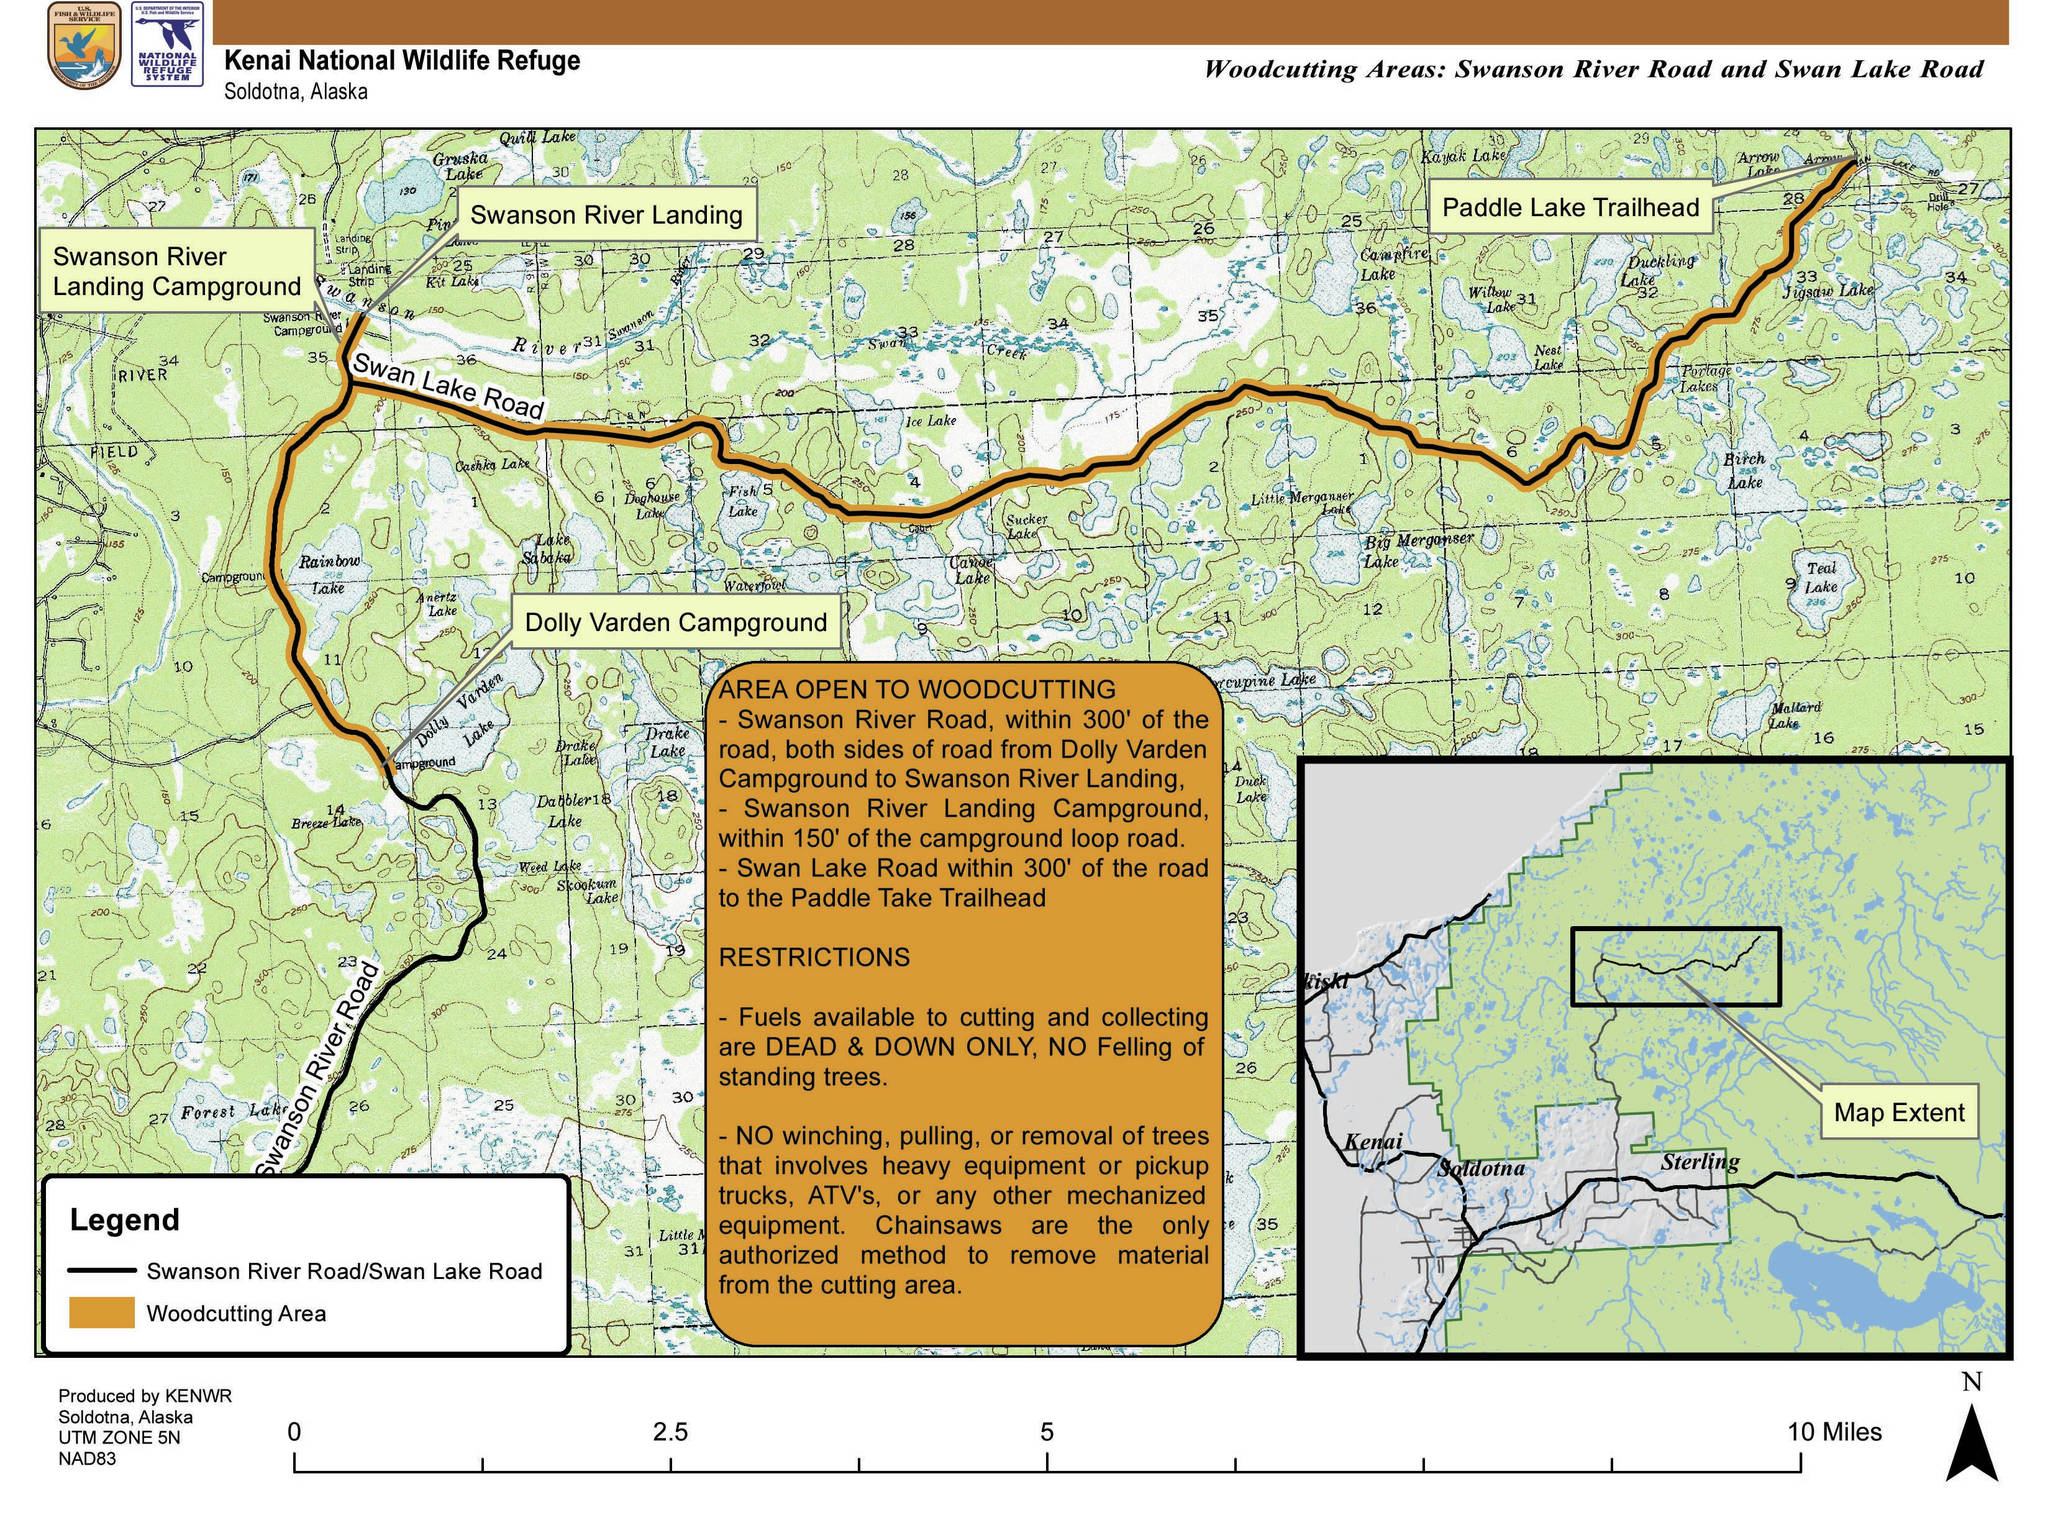 A map shows the Swanson River Road and Swan Lake Road woodcutting areas. (Image courtesy Kenai National Wildlife Refuge)